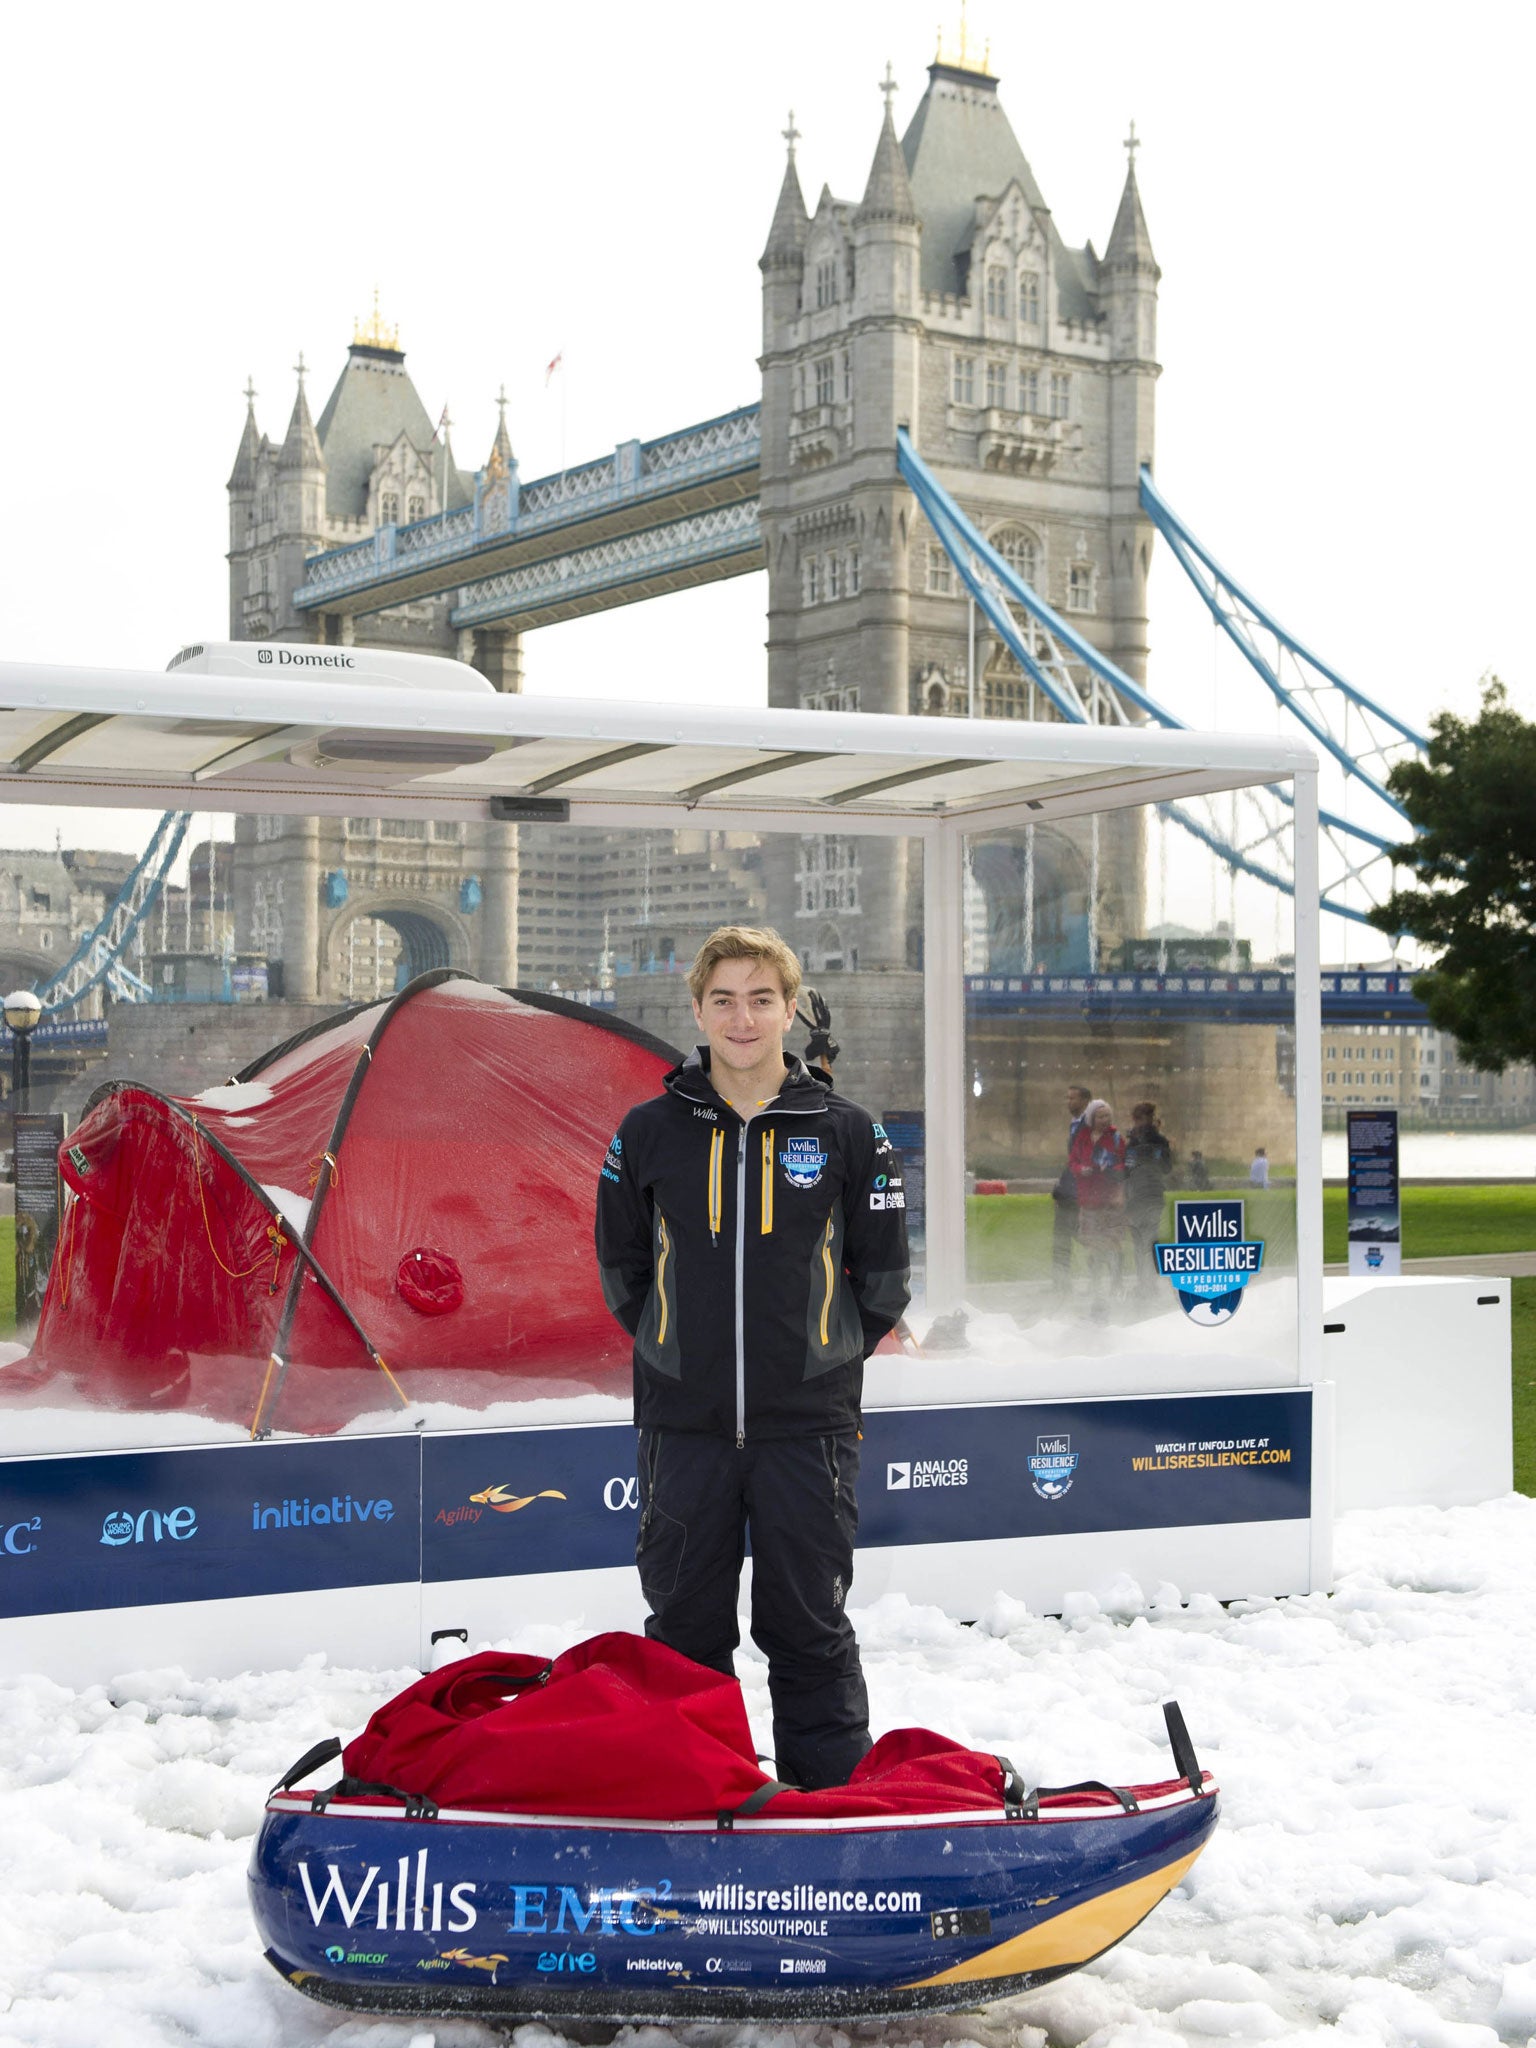 Parker Liautaud outside the Antarctic chamber, where the temperature is -25C